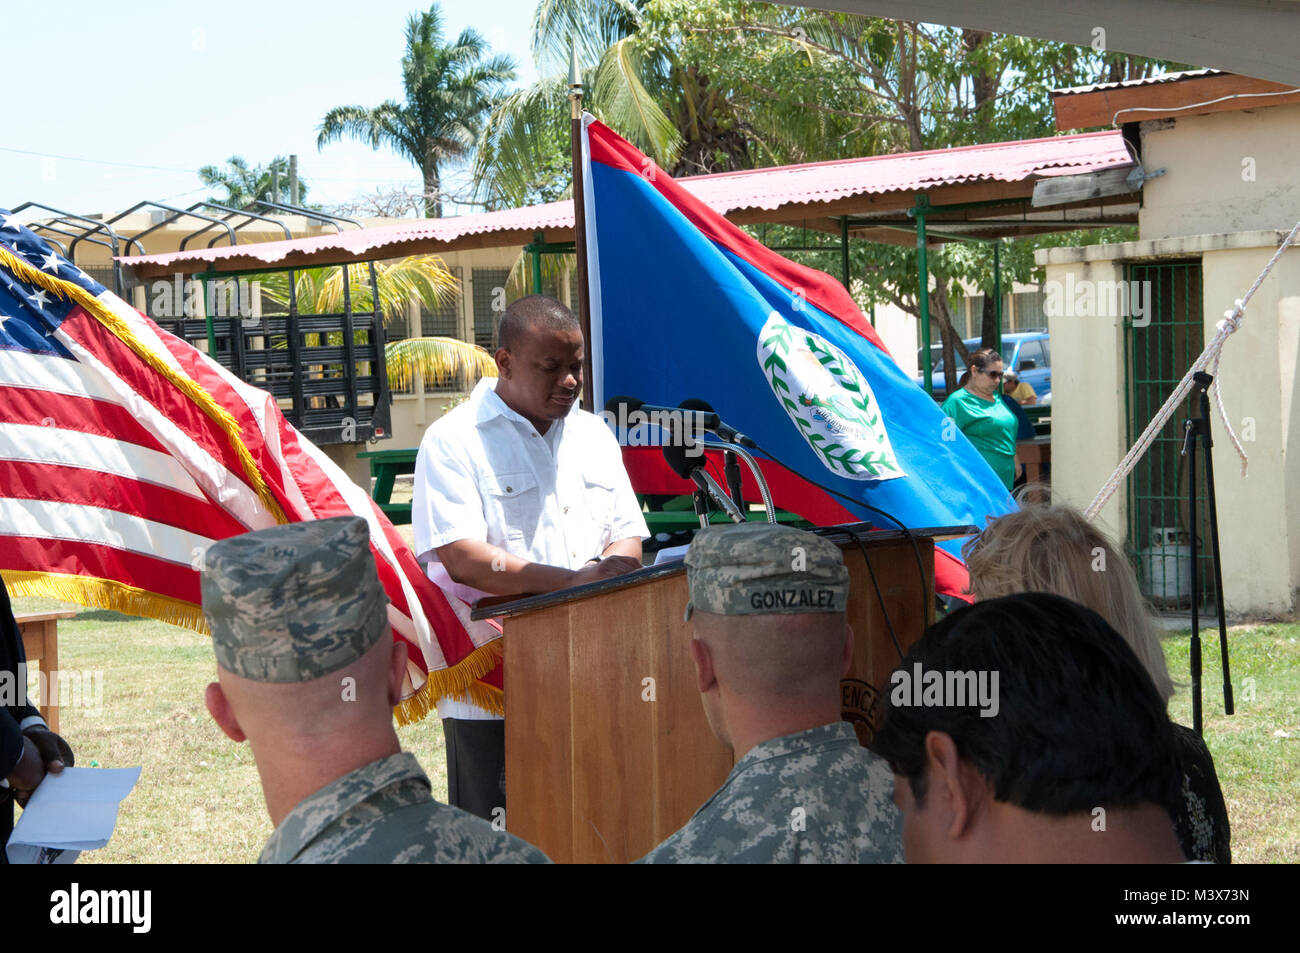 Patrick Faber, Belize minister of education, speaks during the New Horizons Belize 2014 opening ceremonies April 10, 2014, at the Edward P. Yorke school in Belize City, Belize. New Horizons is a multifaceted, international exercise comprising Belize Defence Force and U.S. military civil engineers constructing four school facilities and one medical care facility, and it also encompasses numerous medical readiness training exercises throughout the country. Opening ceremonies included presentations by each of the four schools receiving new facilities, as well as speeches from the Belizean ministe Stock Photo